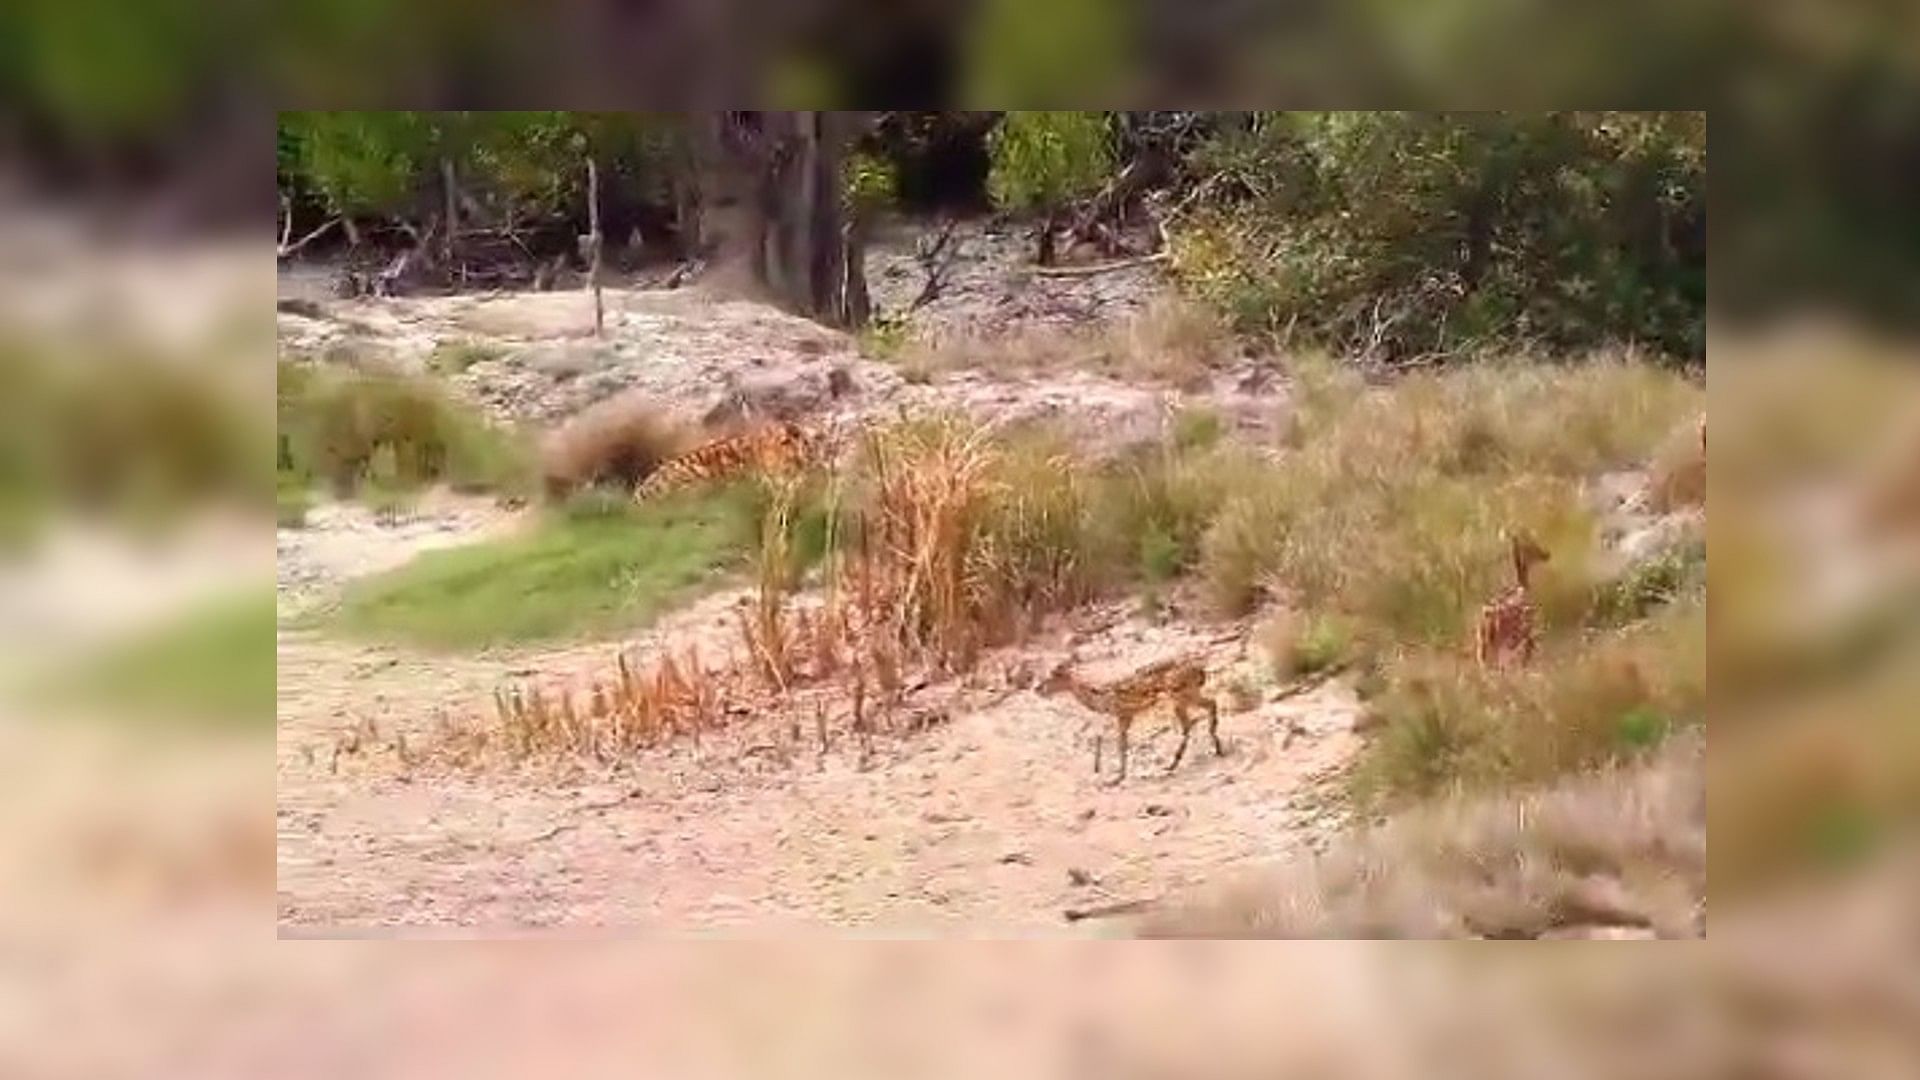 Tiger Viral Video:  tiger chasing a deer watch how luckiest deer dodged the tiger